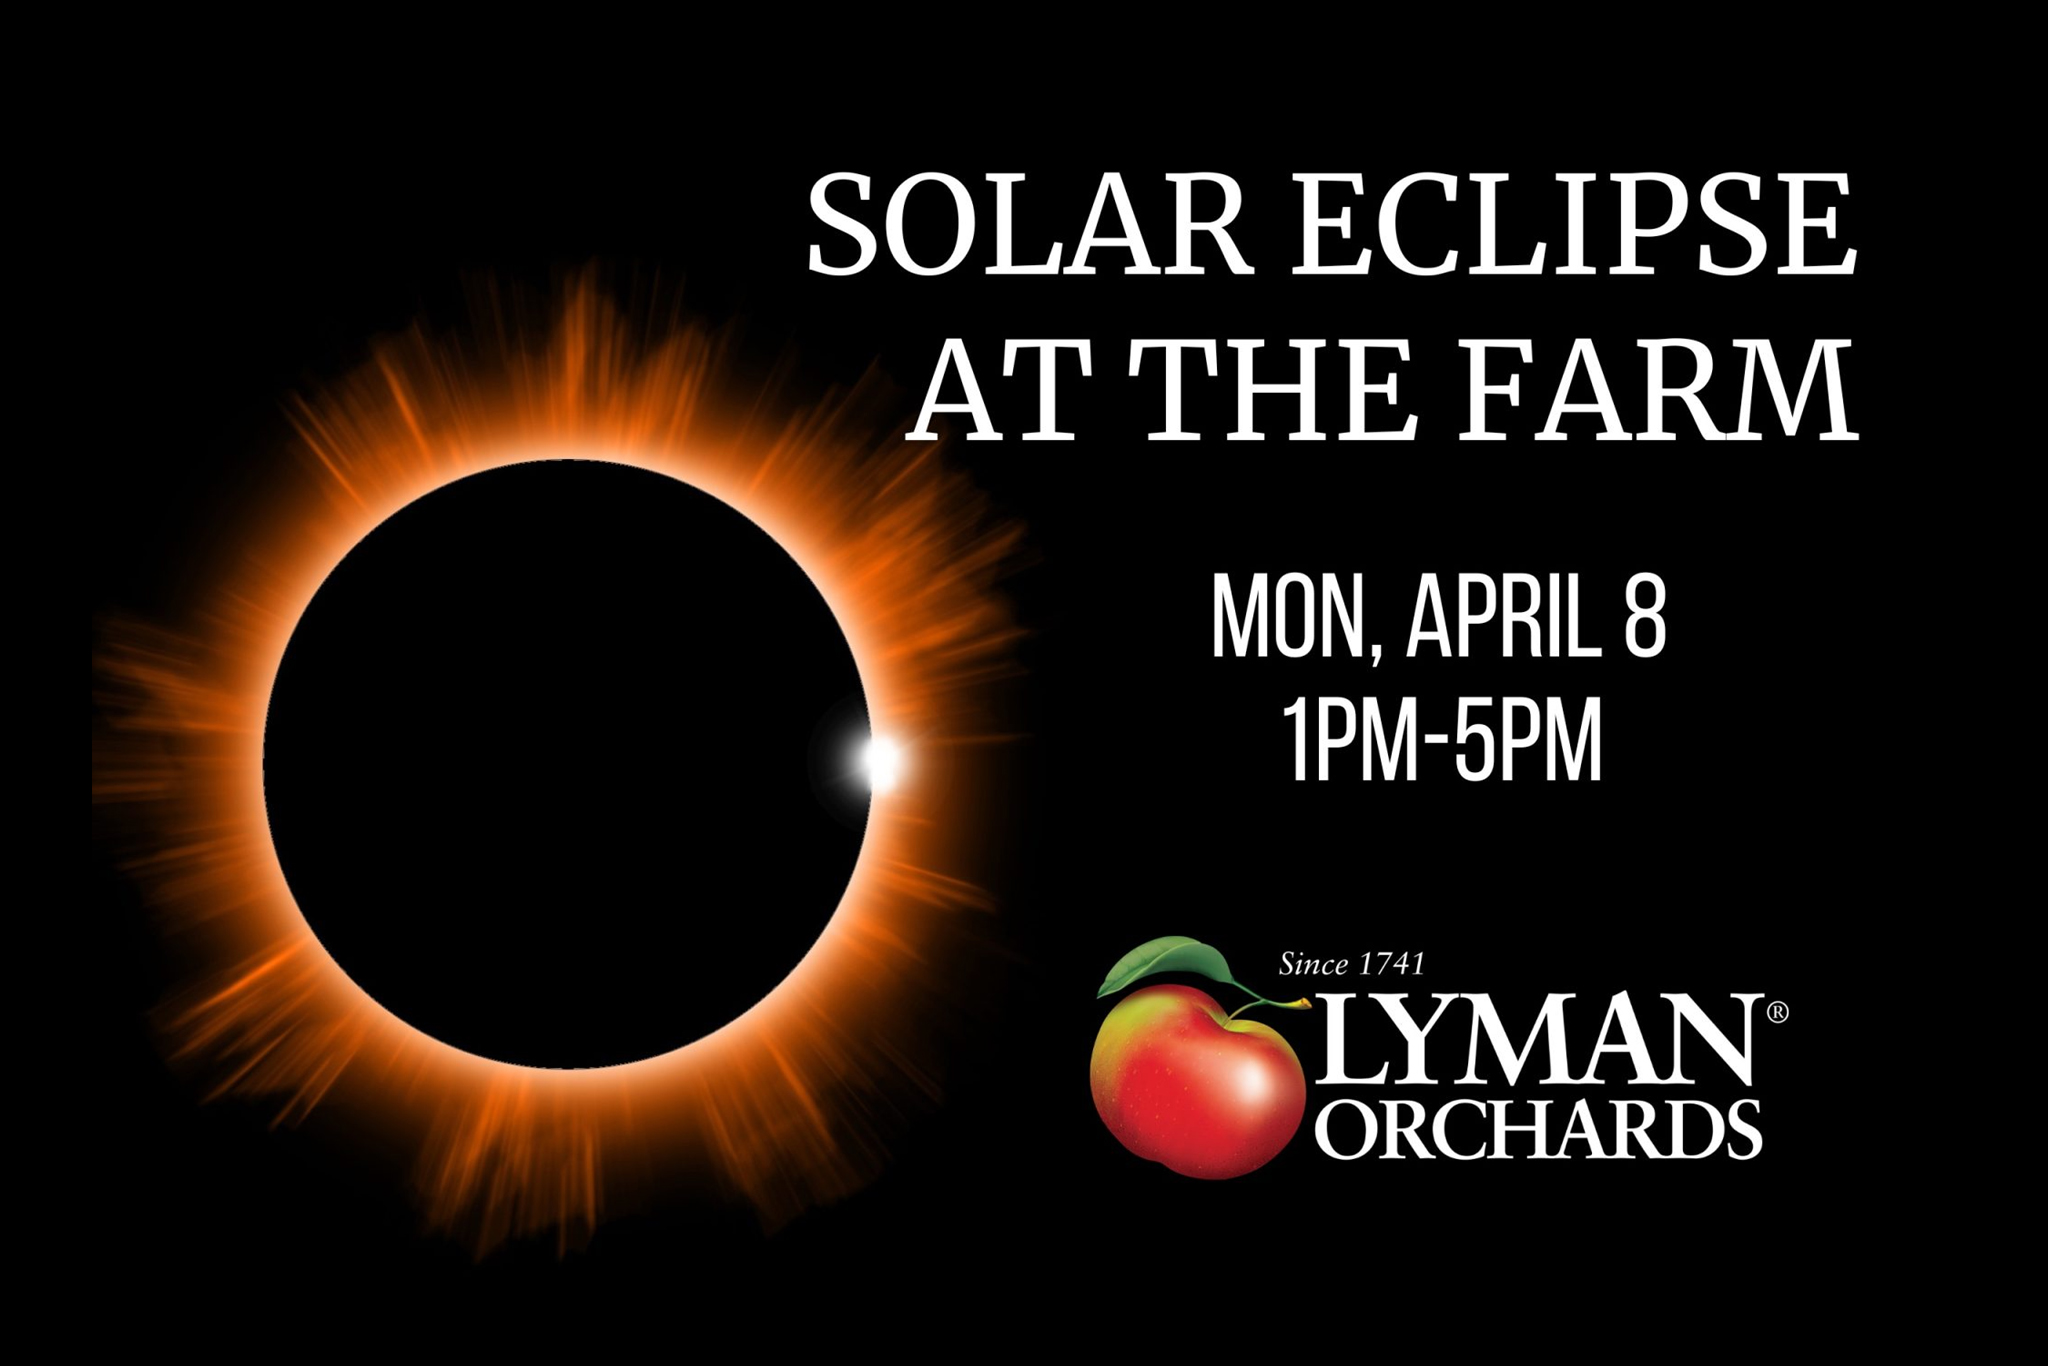 School Vacation Week: Solar Eclipse Event at Lyman Orchards